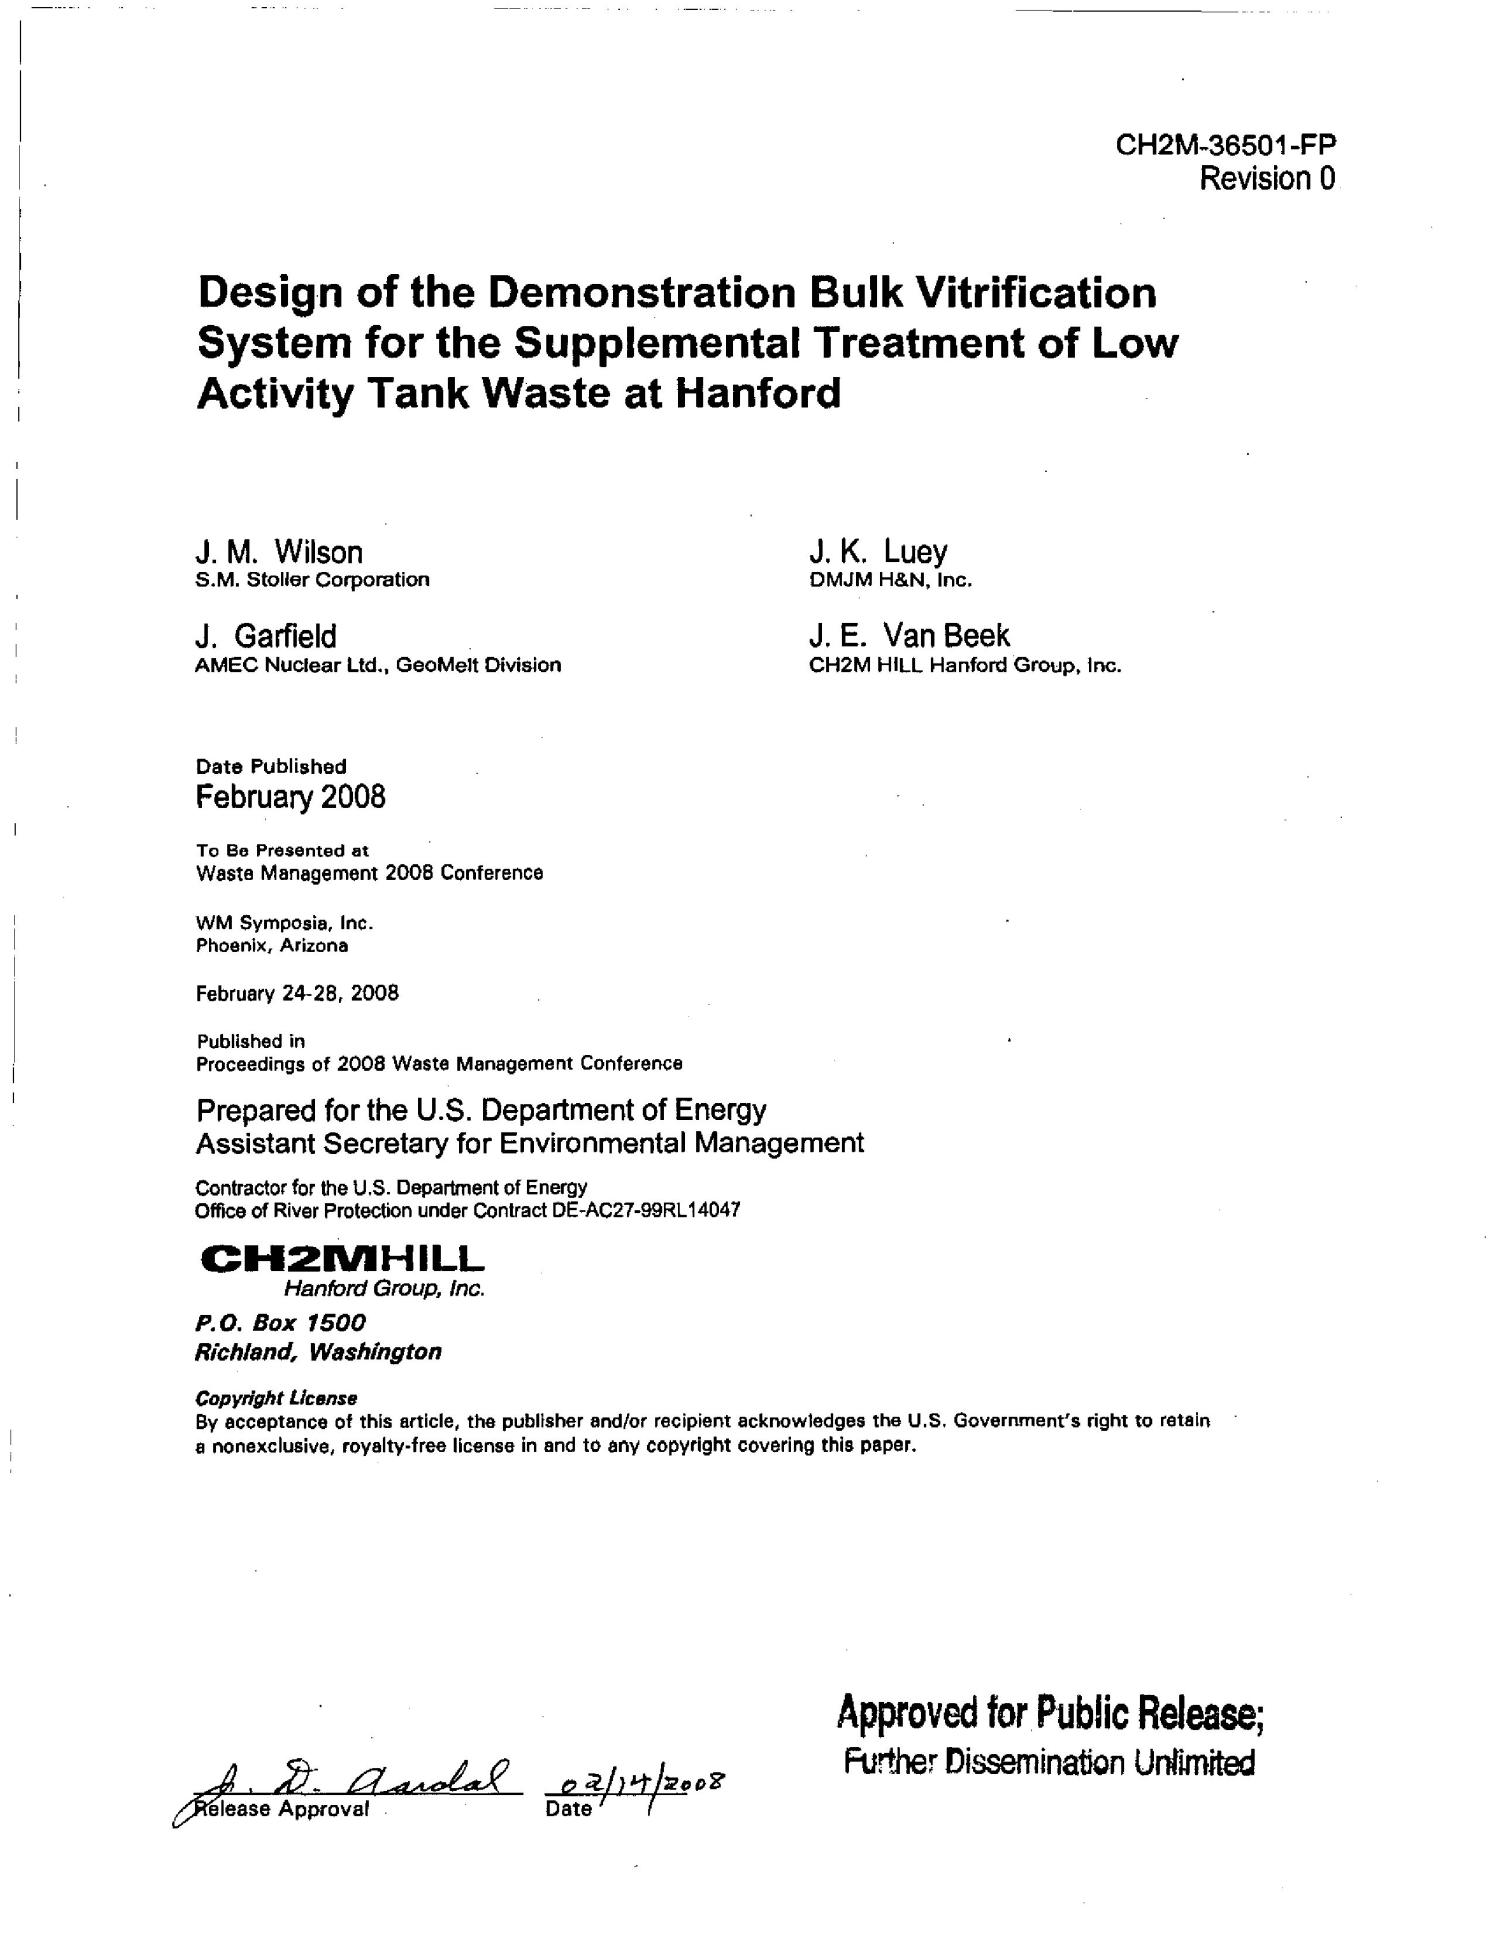 DESIGN OF THE DEMOSNTRATION BULK VITRIFICATION SYSTEM FOR THE SUPPLEMENTAL TREATMENT OF LOW ACTIVITY TANK WASTE AT HANFORD
                                                
                                                    [Sequence #]: 2 of 17
                                                